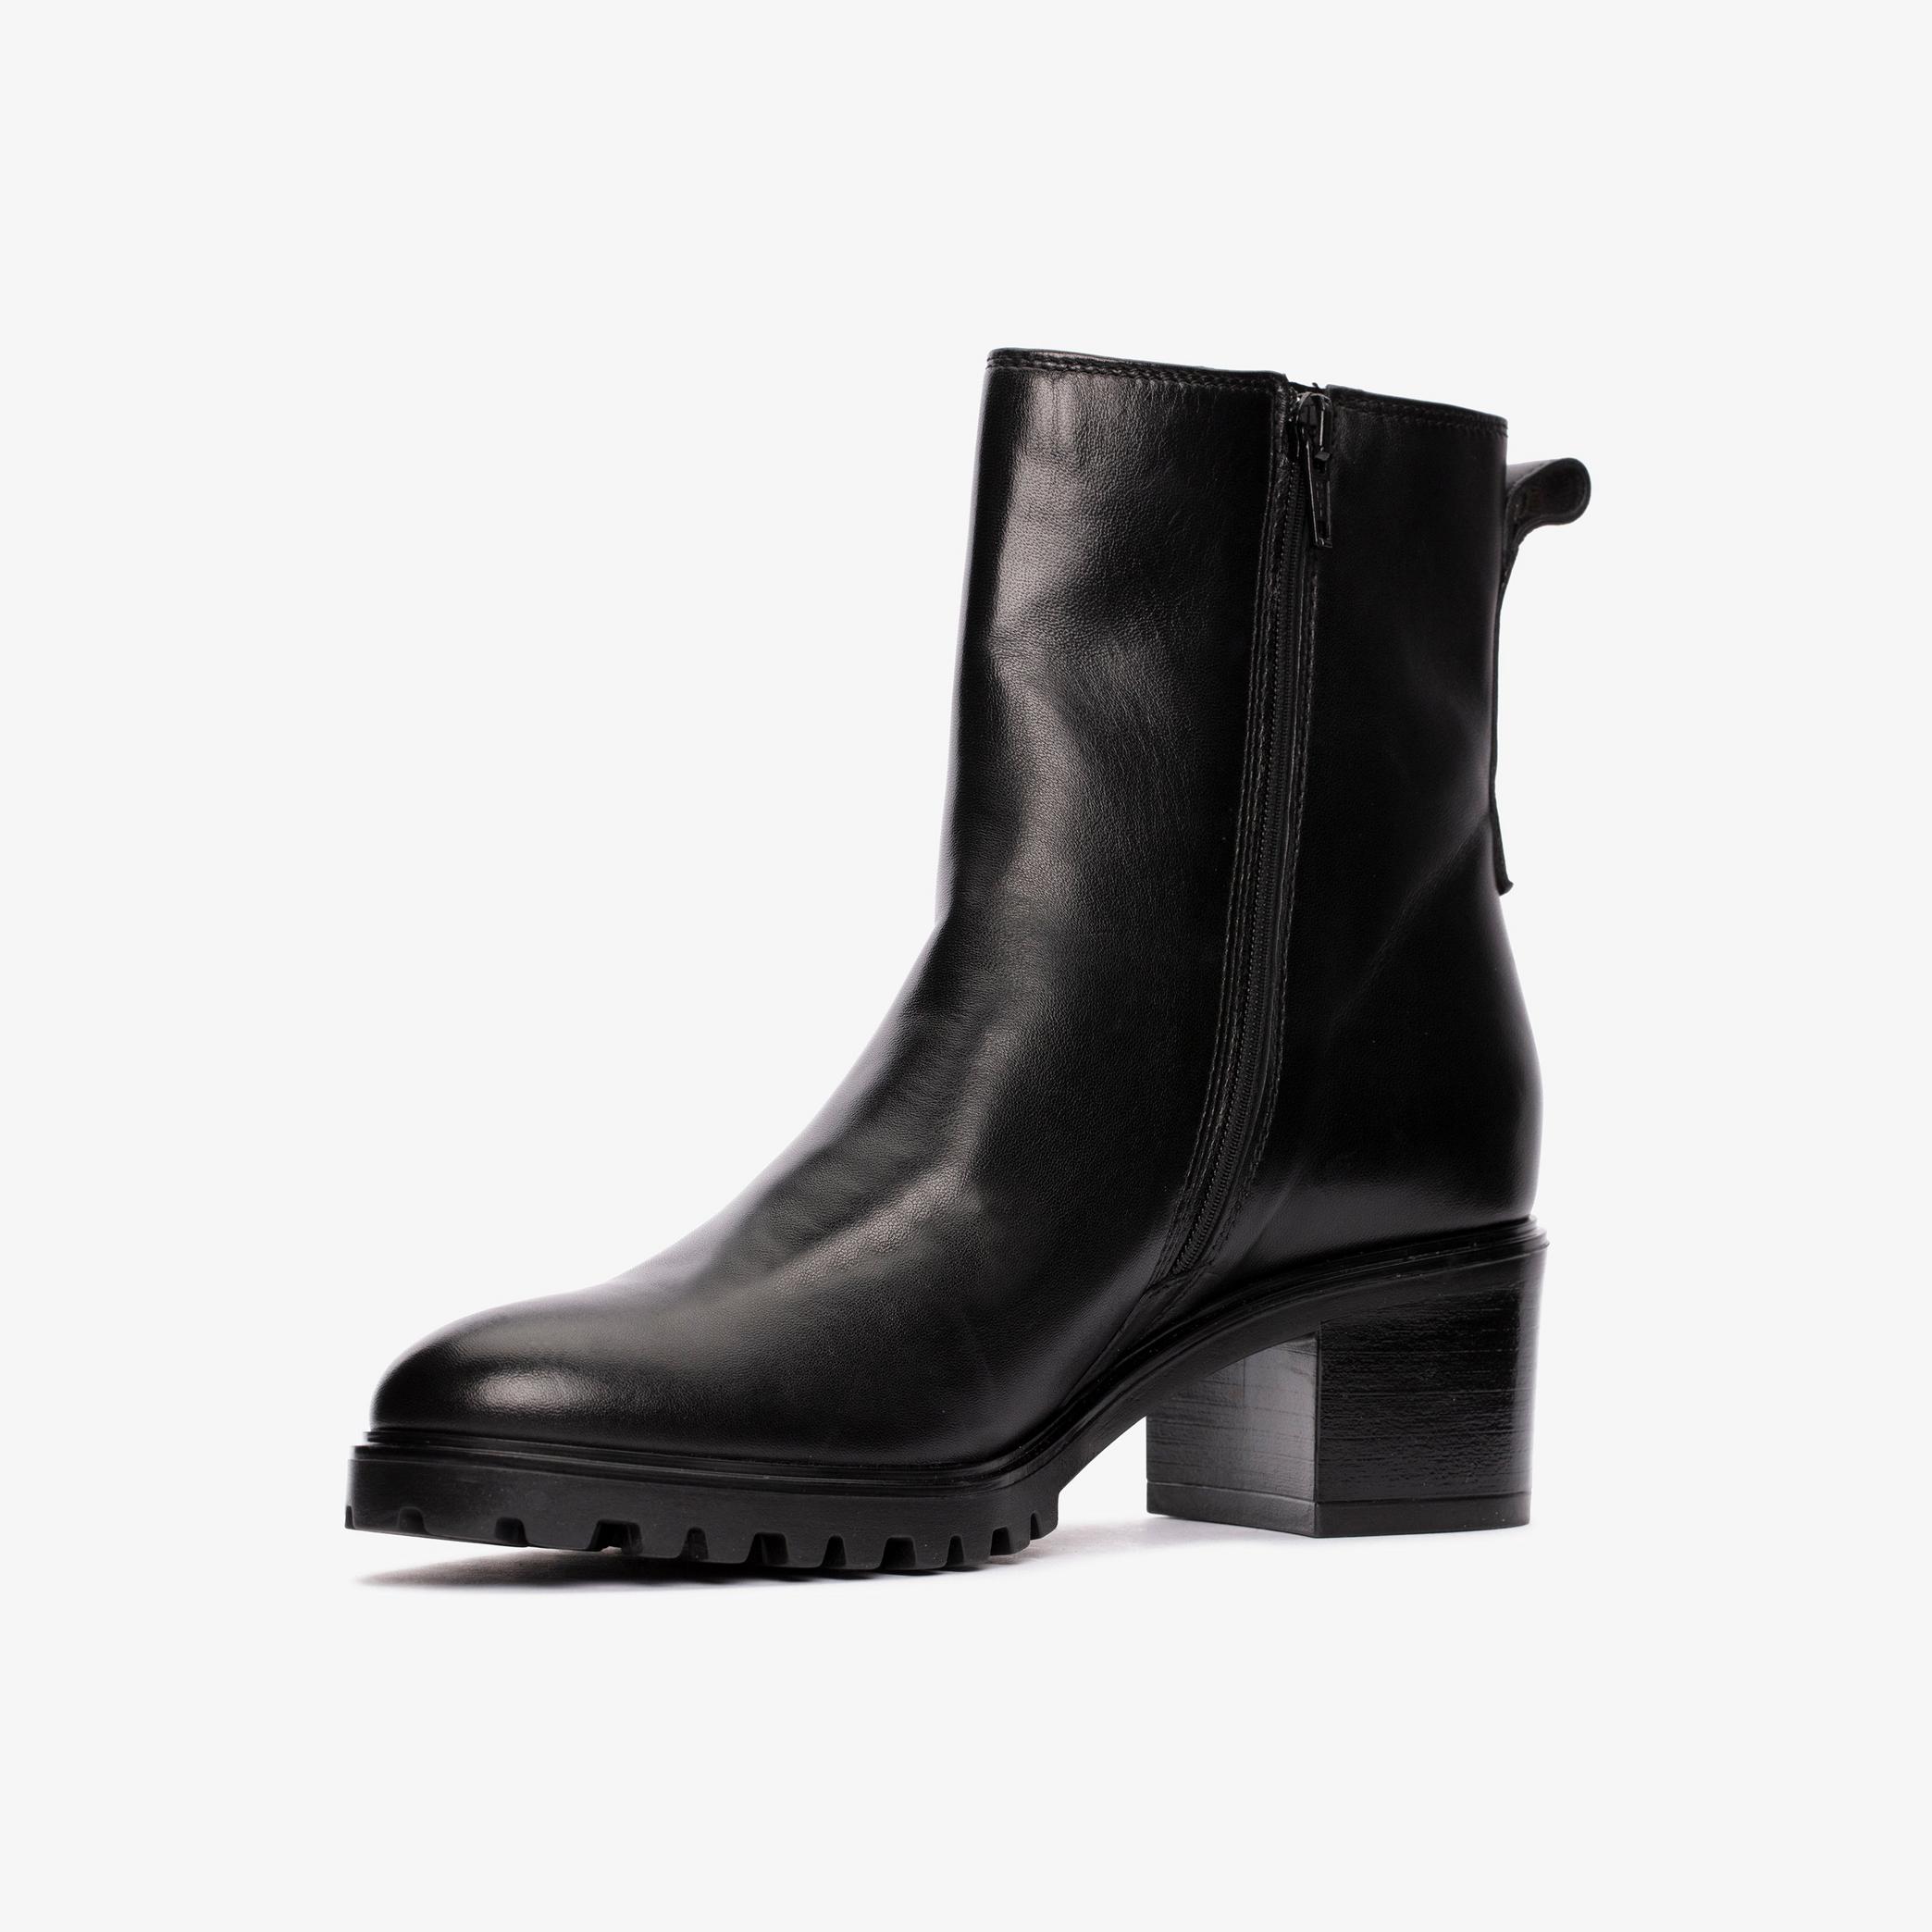 Meraleigh Zip Black Leather Ankle Boots, view 4 of 6